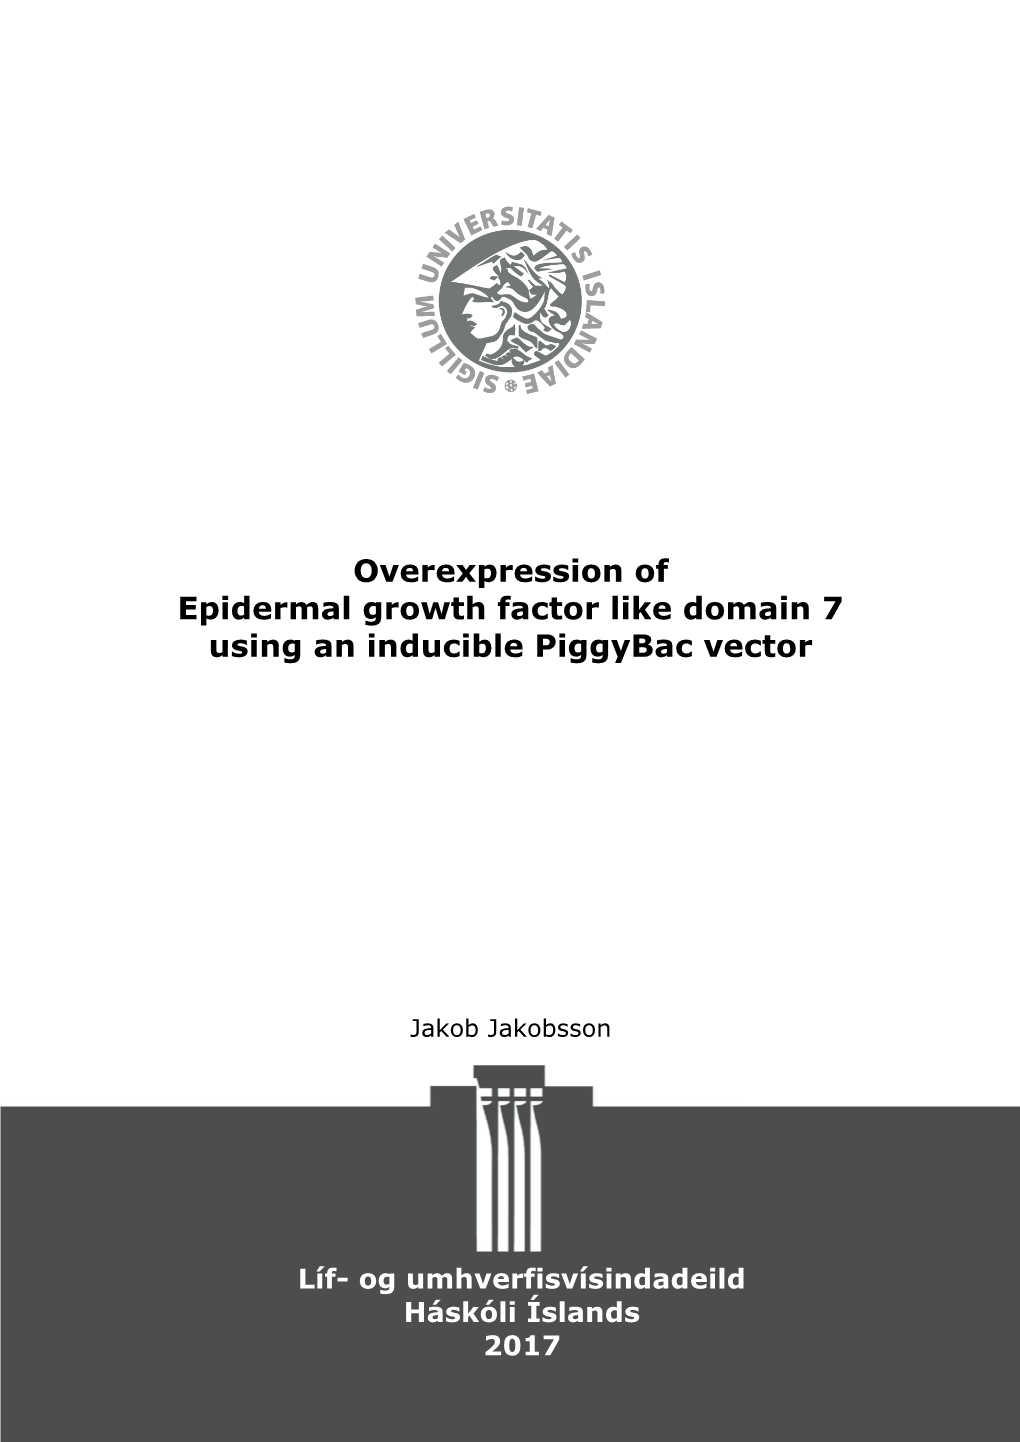 Overexpression of Epidermal Growth Factor Like Domain 7 Using an Inducible Piggybac Vector